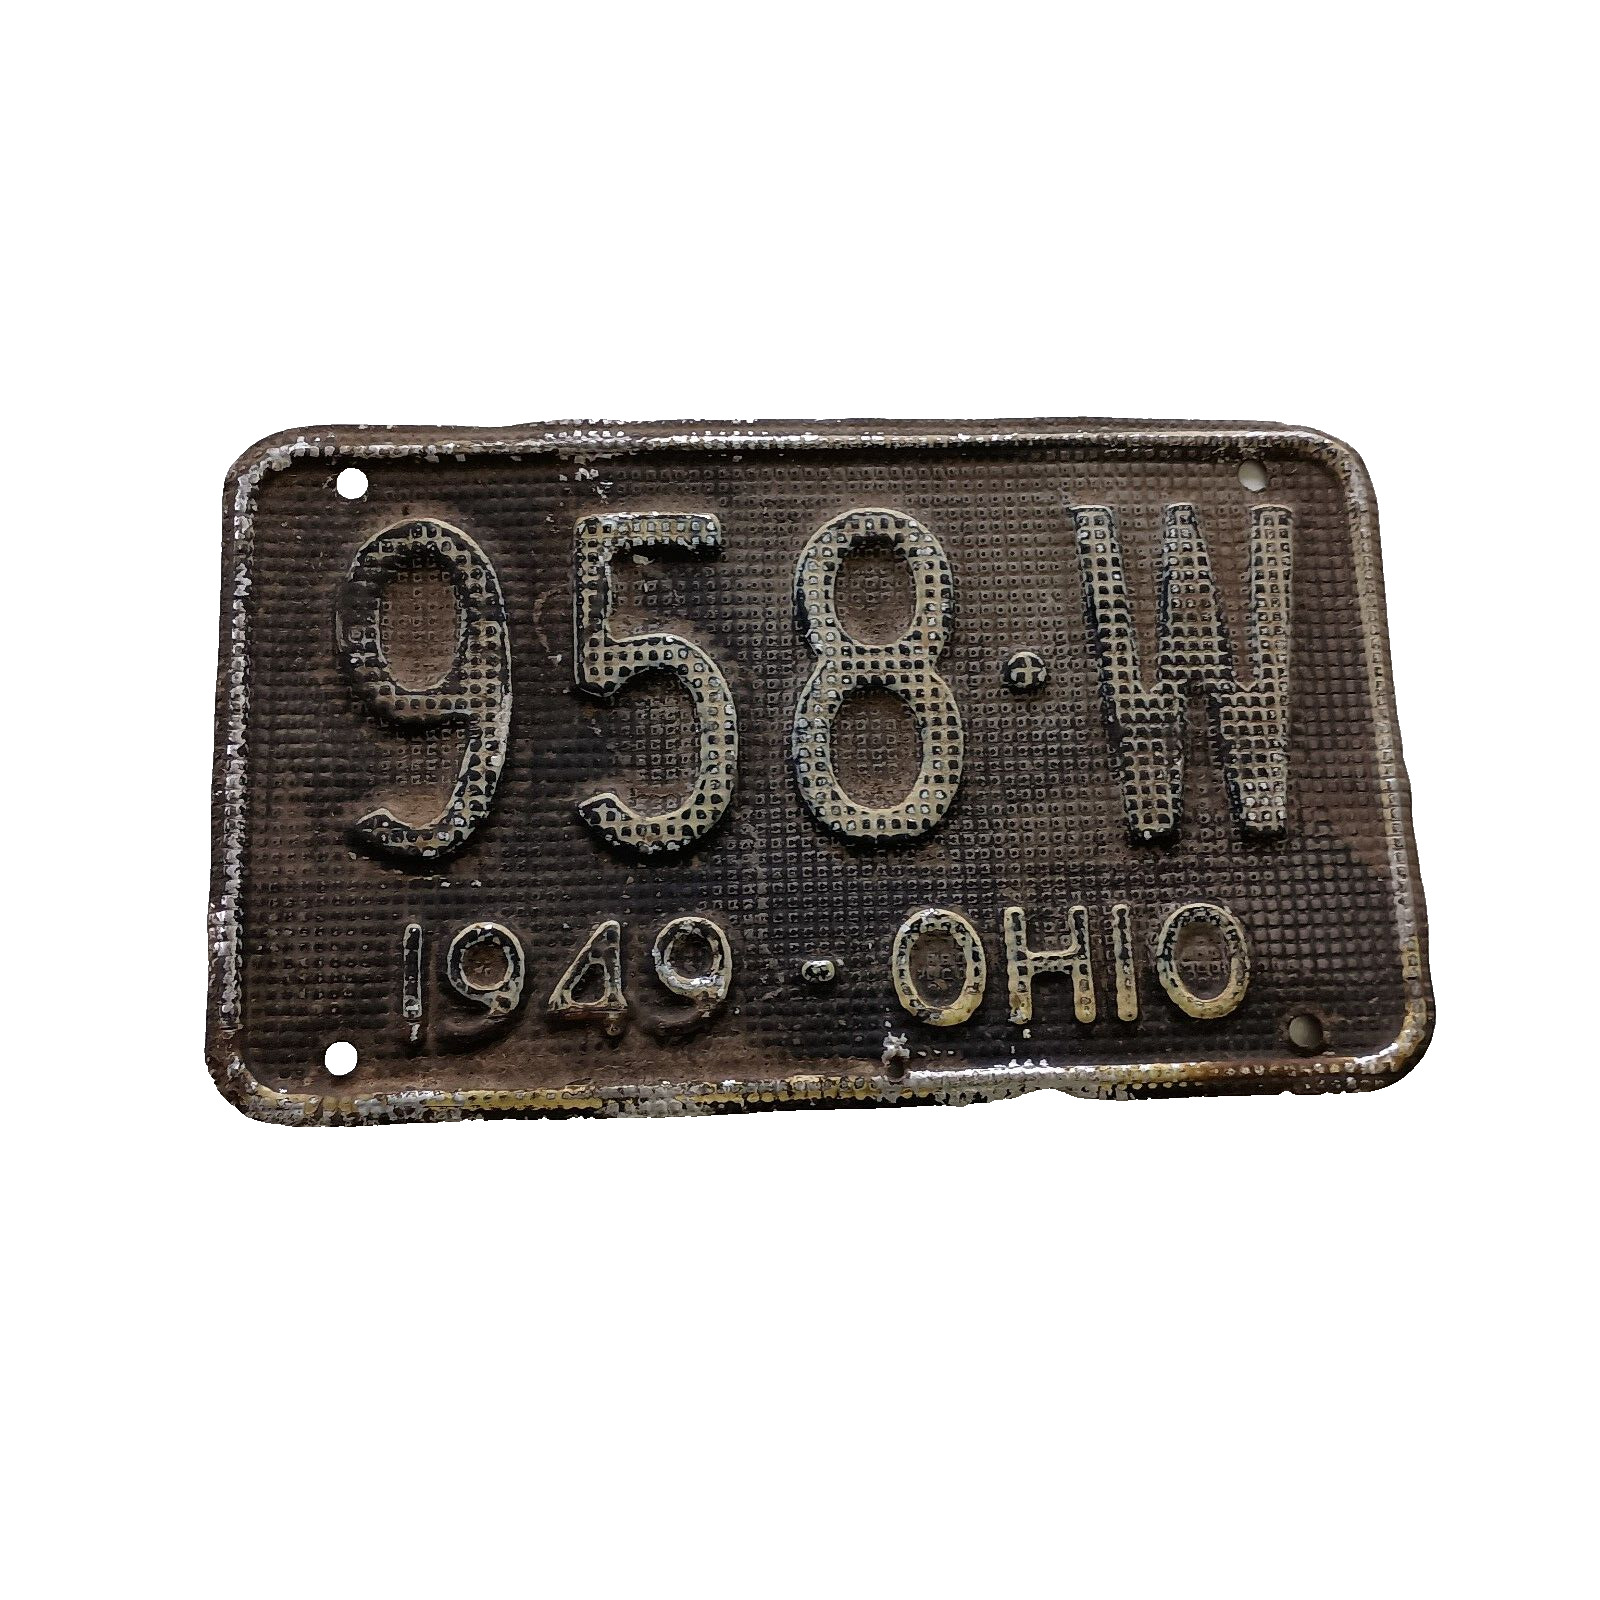 Ohio 1949 License Plate 958 W Original Paint Black and White One Plate